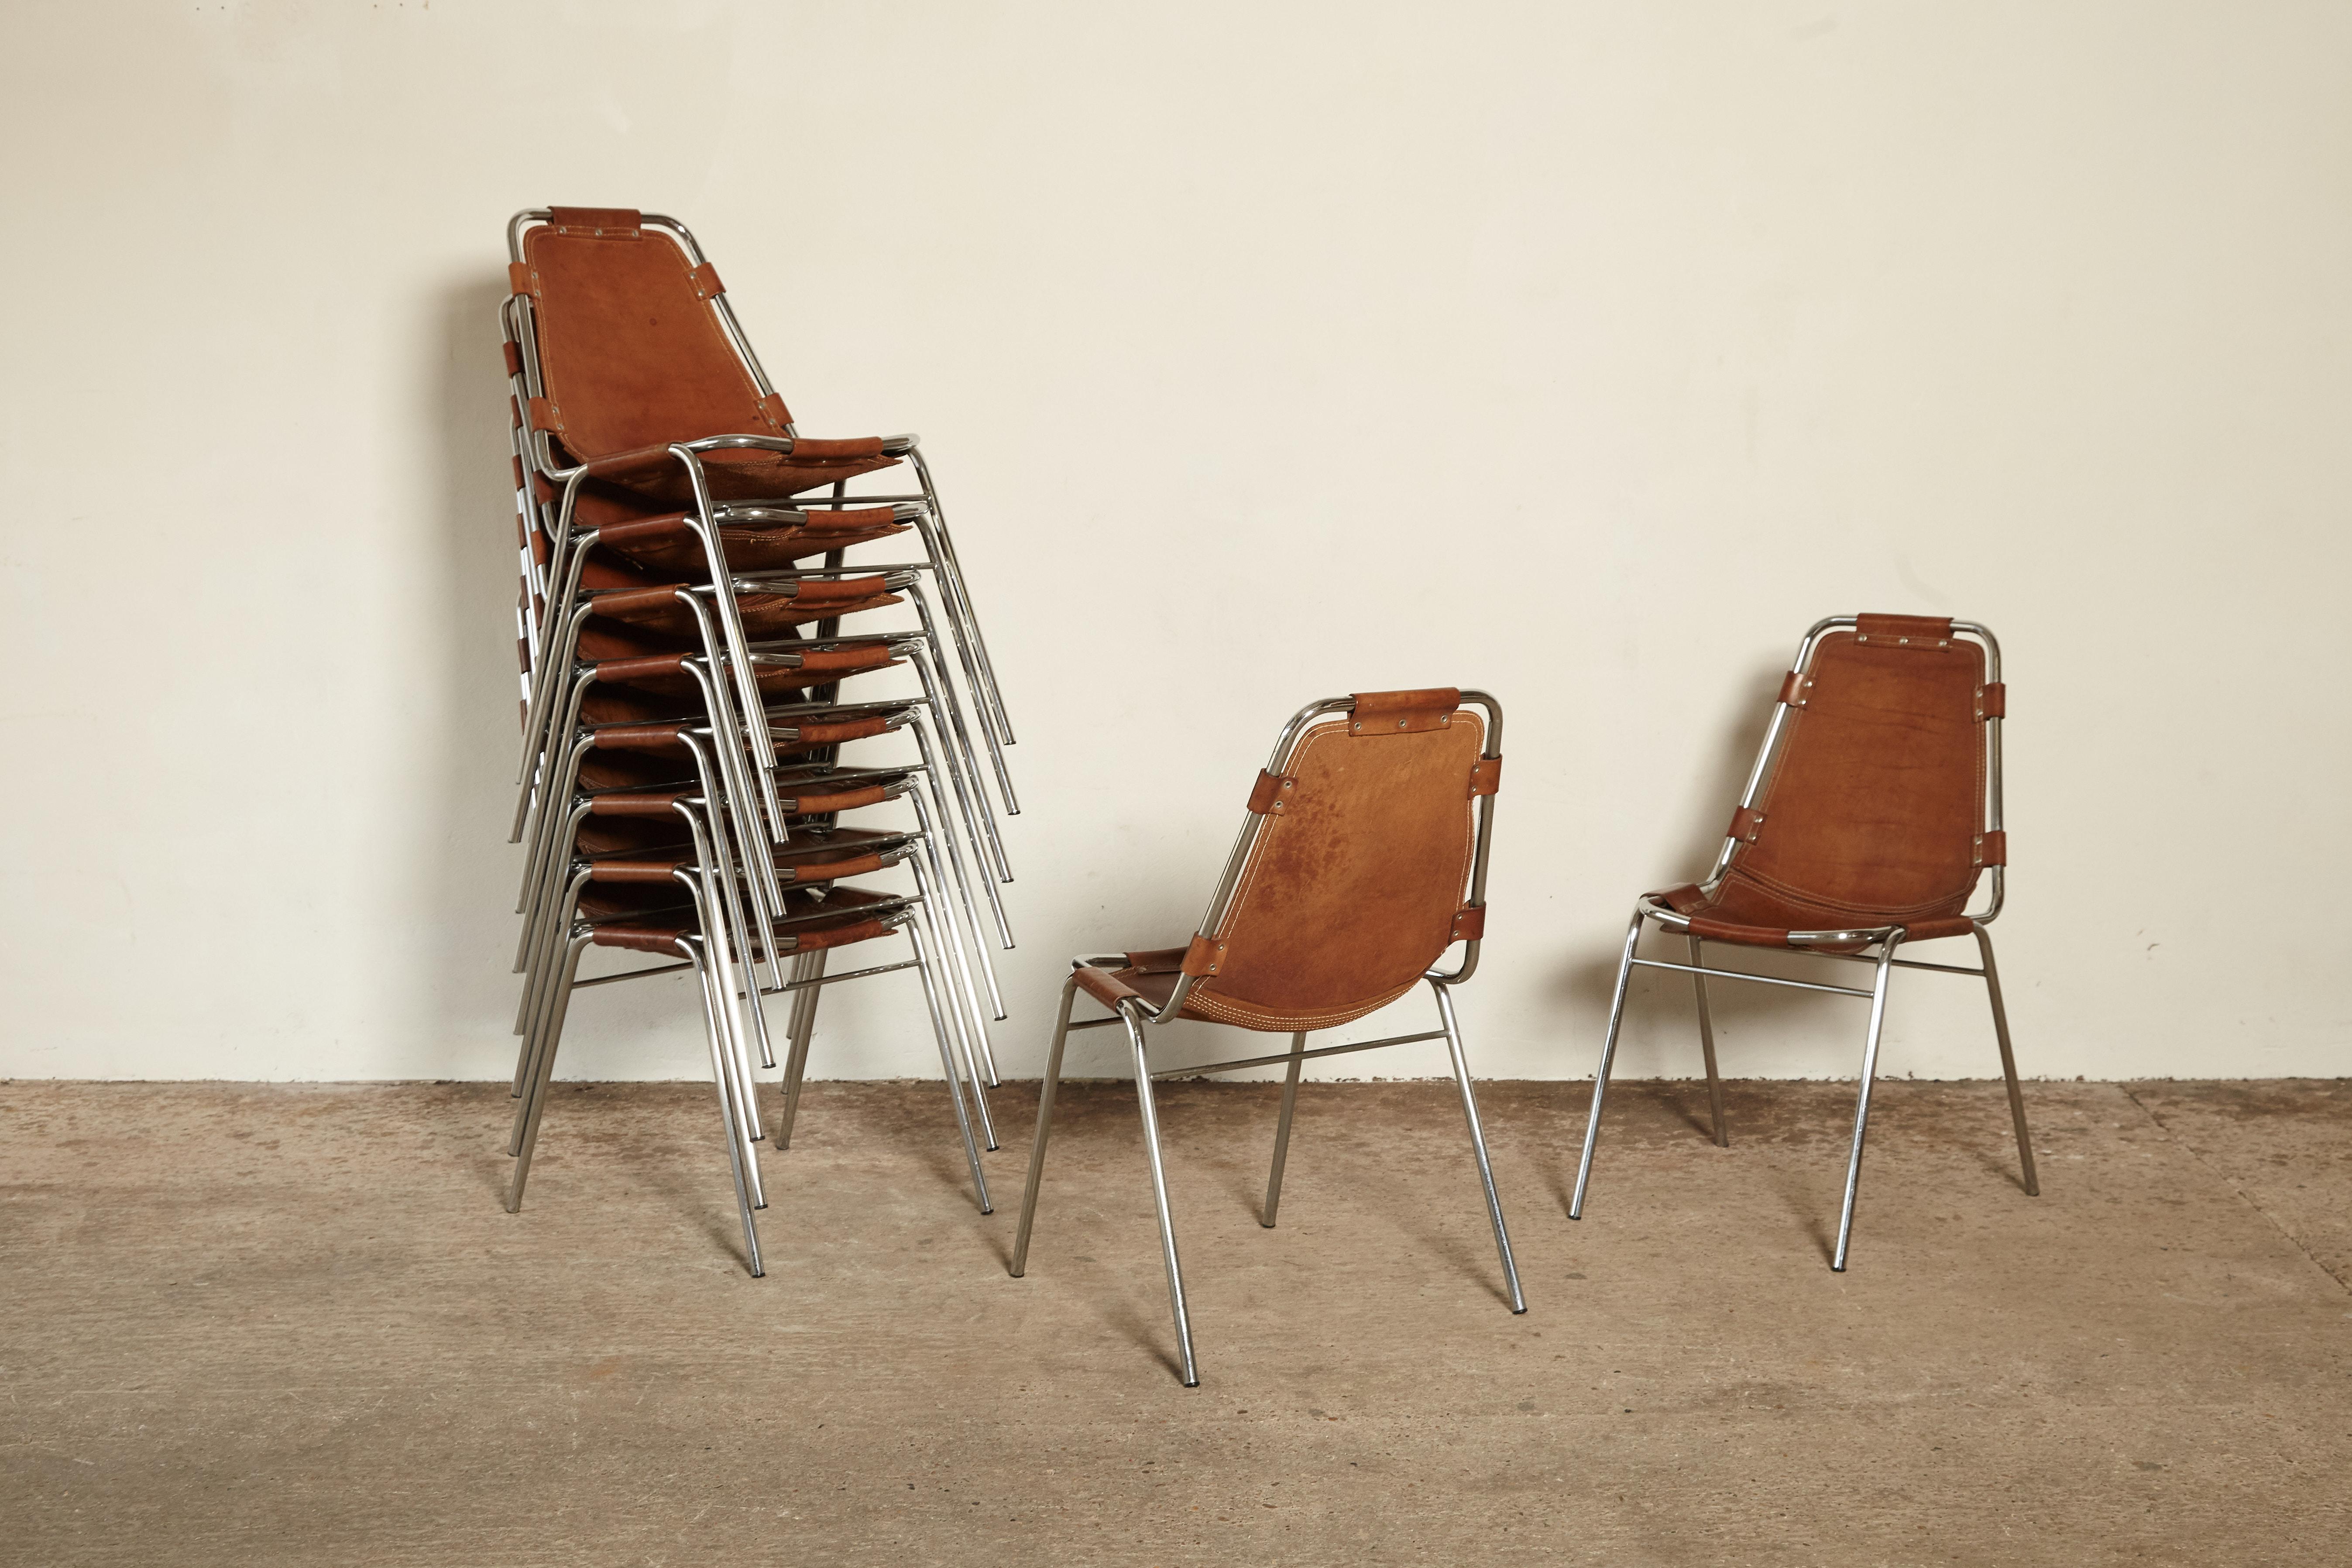 'Les Arcs' chairs in tubular steel and cognac leather, France/Italy, 1970s. Sold as a set of twelve, ten, eight or six. Patinated original leather. Some marks. Some examples marked on the underside.

Les Arcs was a project on